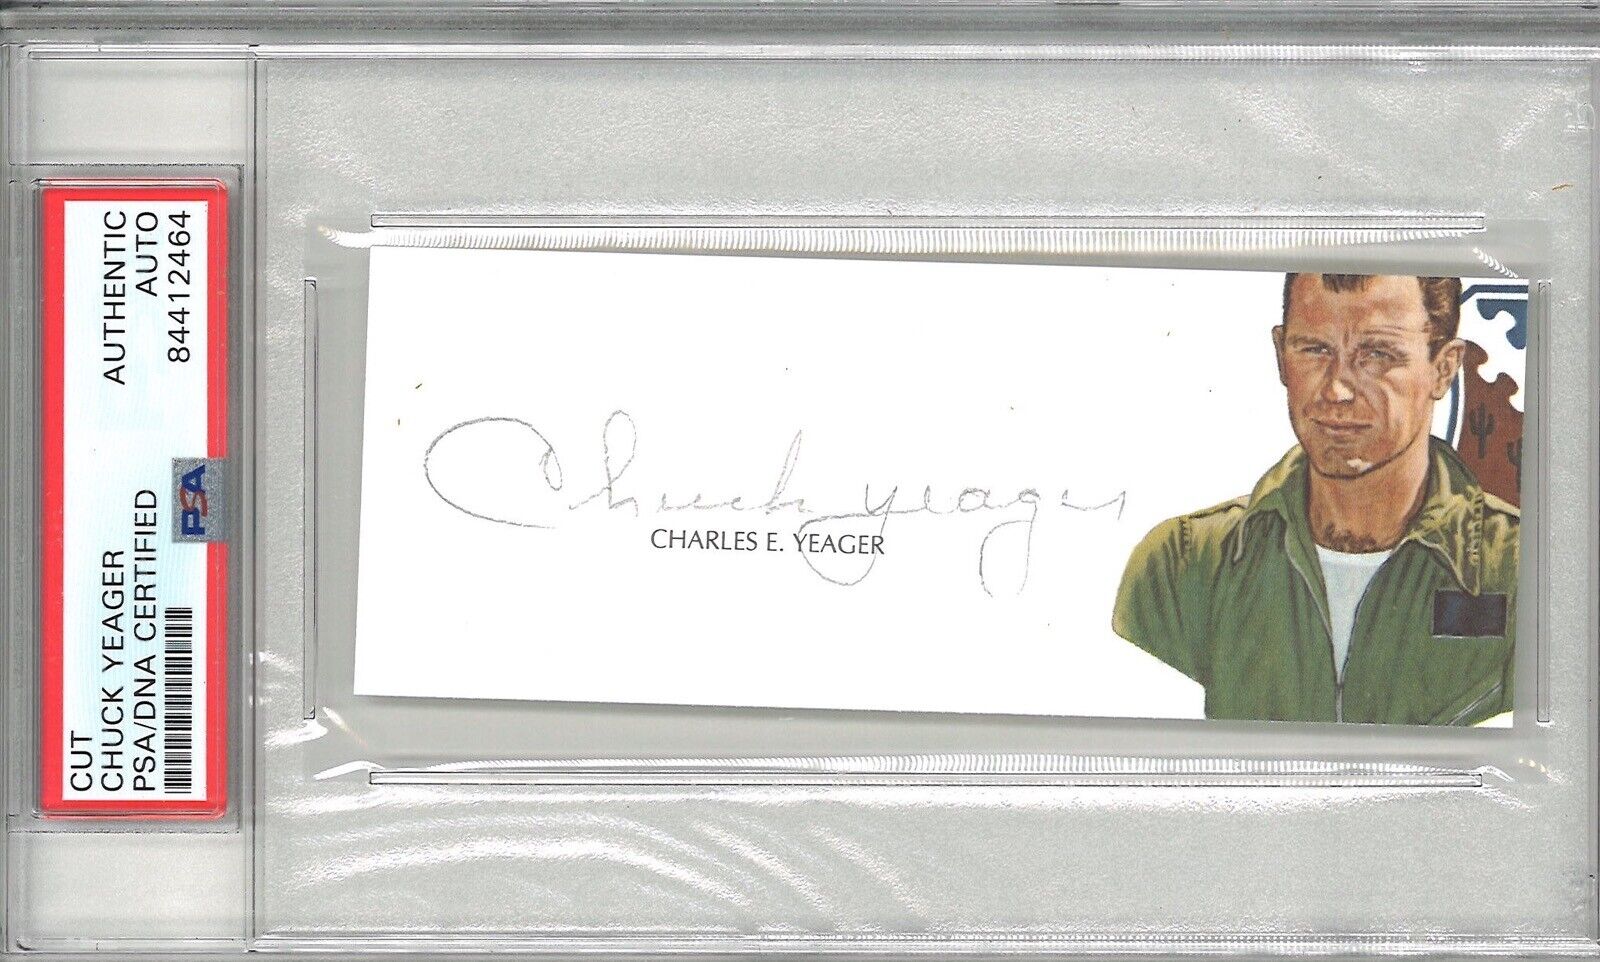 CHUCK YEAGER SIGNED CUT SIGNATURE PSA DNA 84412464 (D) WWII ACE TEST PILOT